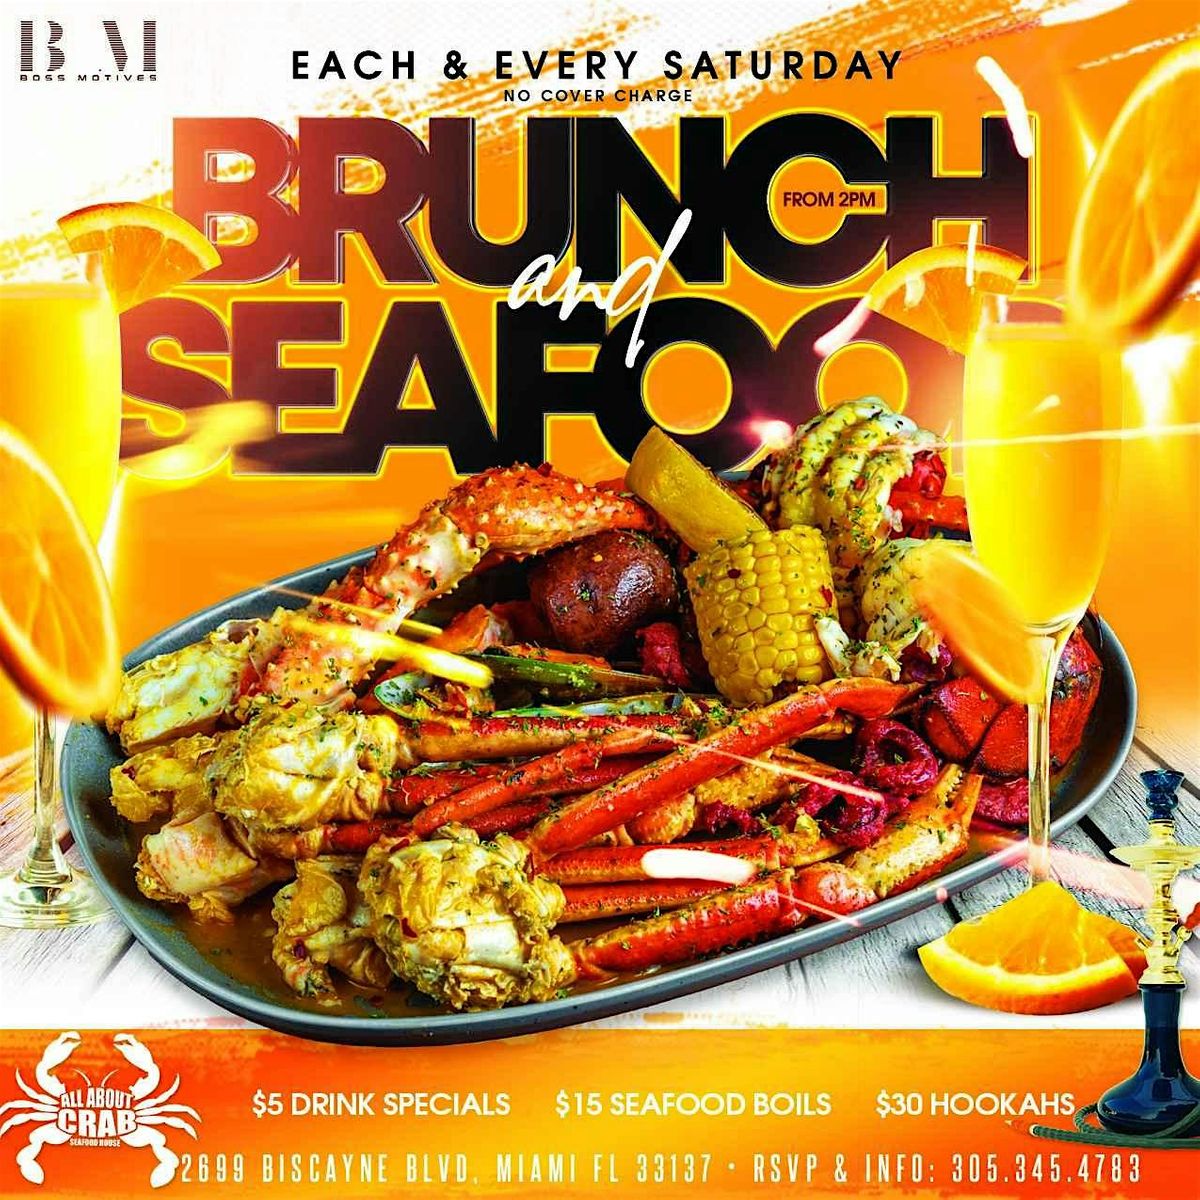 SEAFOOD BRUNCH & DAYPARTY